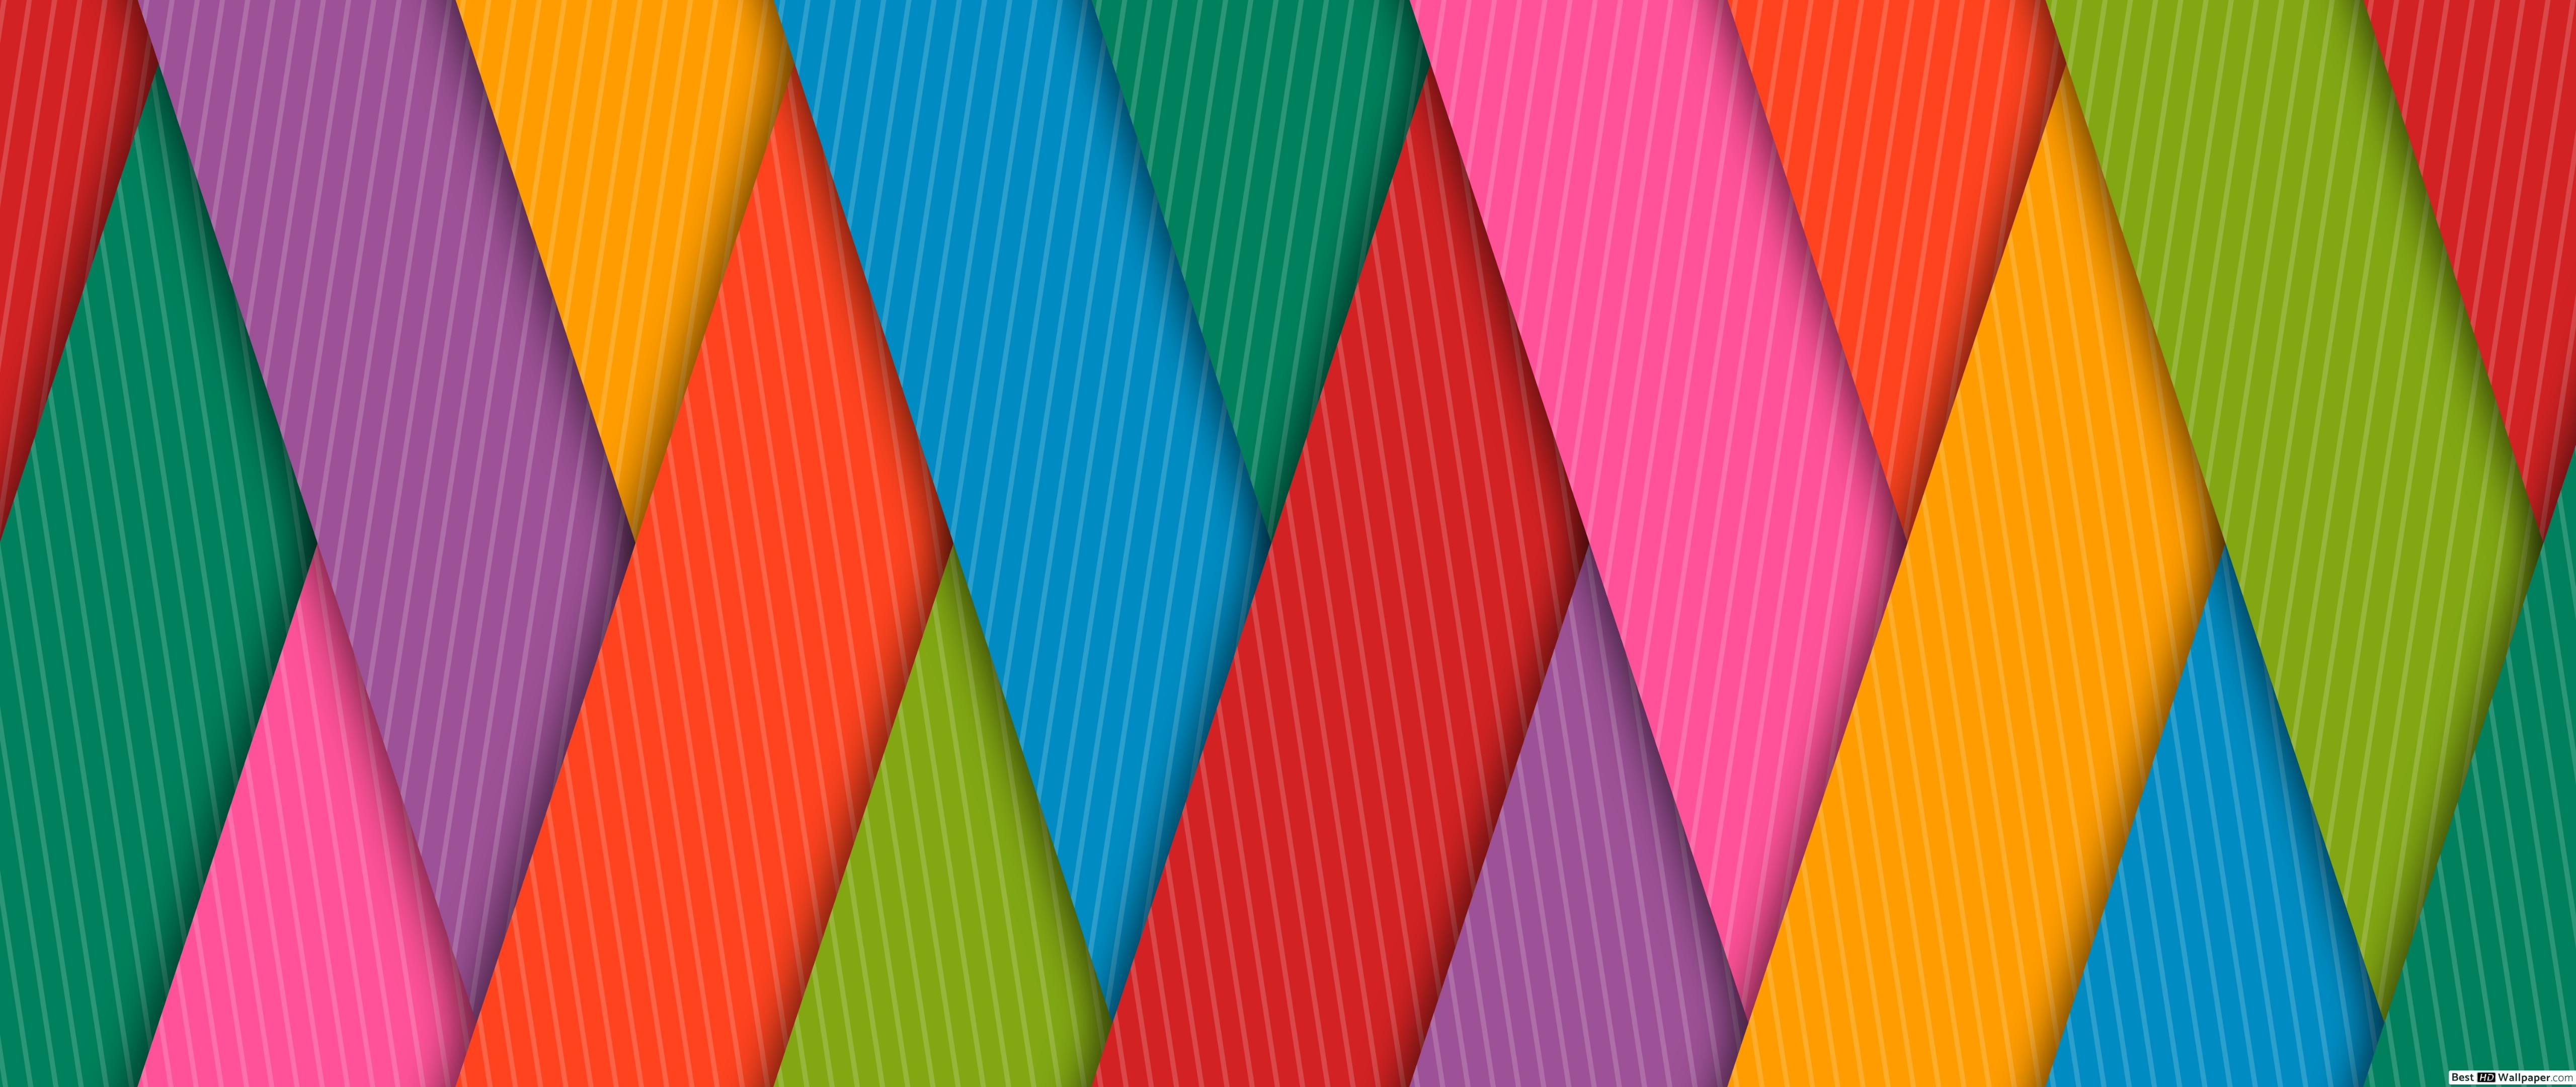 Colorful Lines Background Hd - HD Wallpaper 